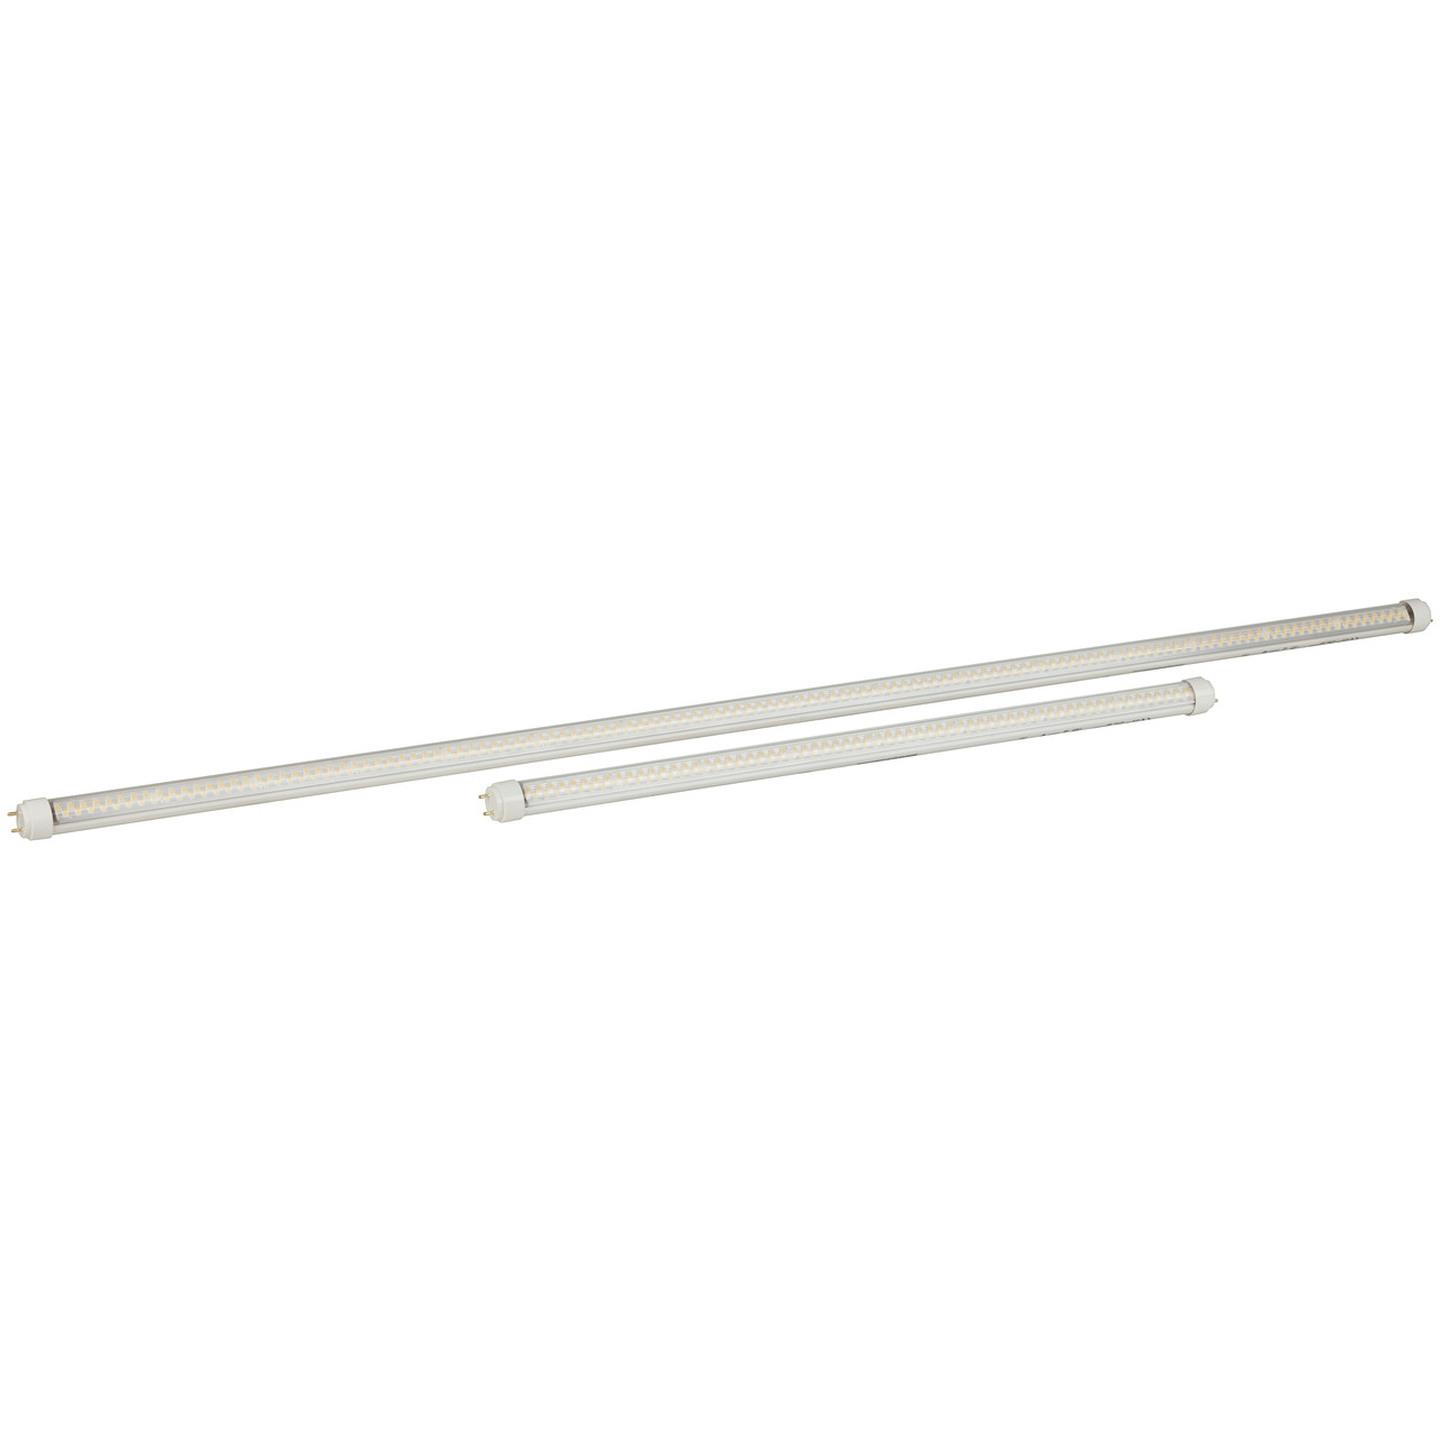 Viribright LED T8 Fluoro Replacement Tube 20W 1200mm Natural White